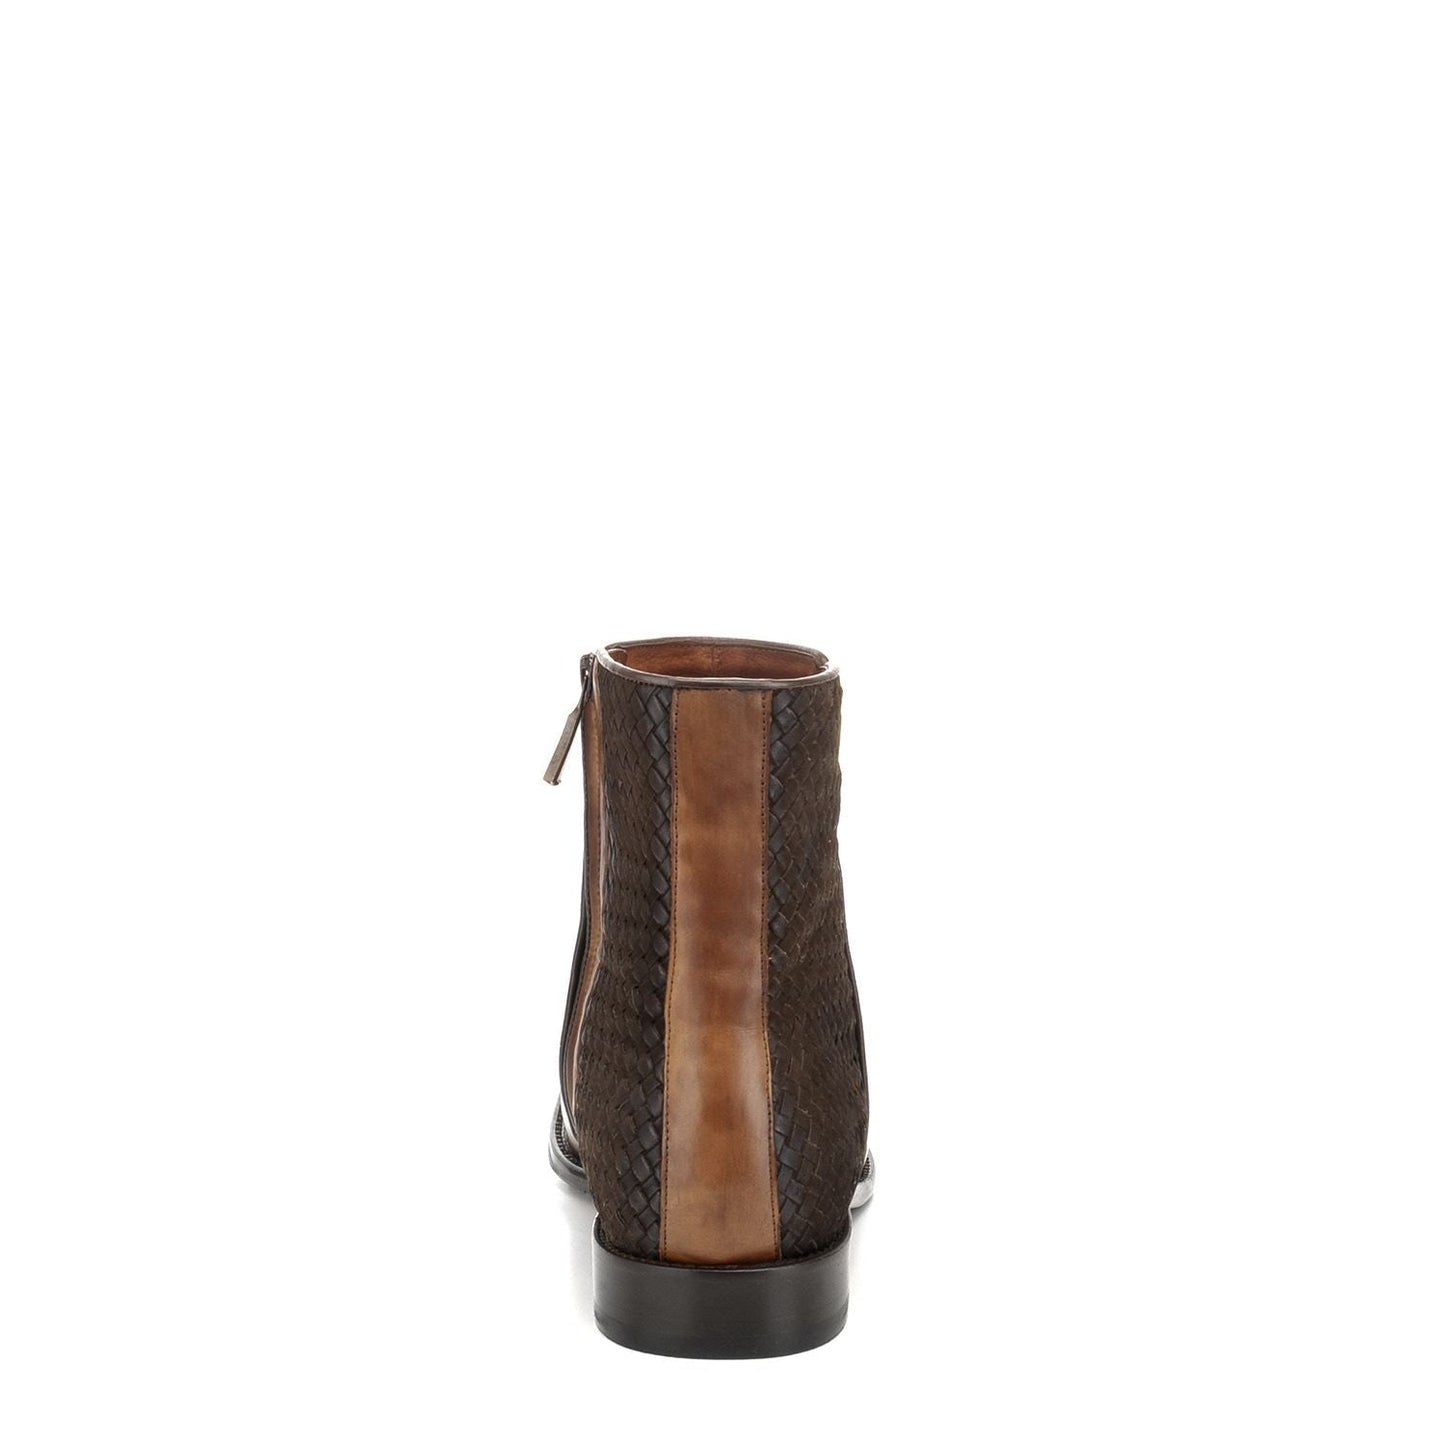 G23TVUE - Cuadra maple dress casual calfskin leather ankle boots for men-FRANCO CUADRA-Kuet-Cuadra-Boots